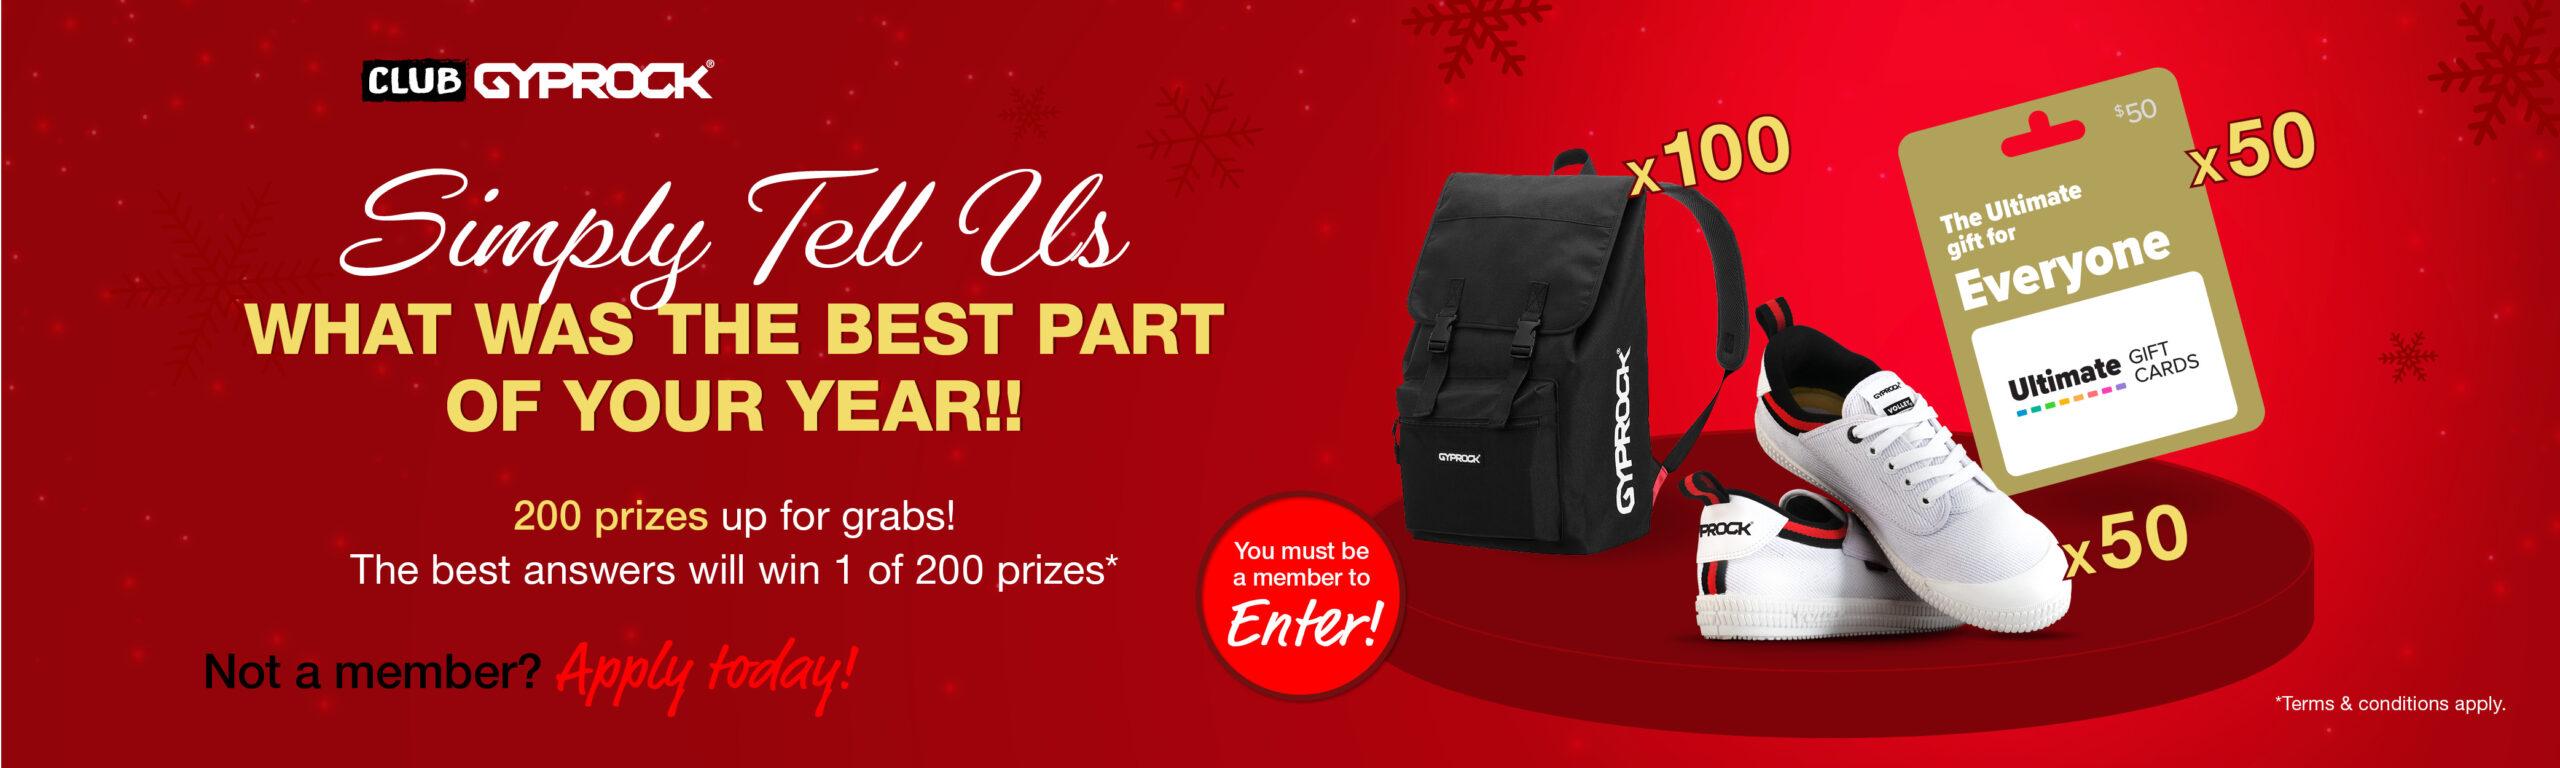 Gyprock Trade Centre Club Gyprock Christmas Promotion Secondary Prizes website banner